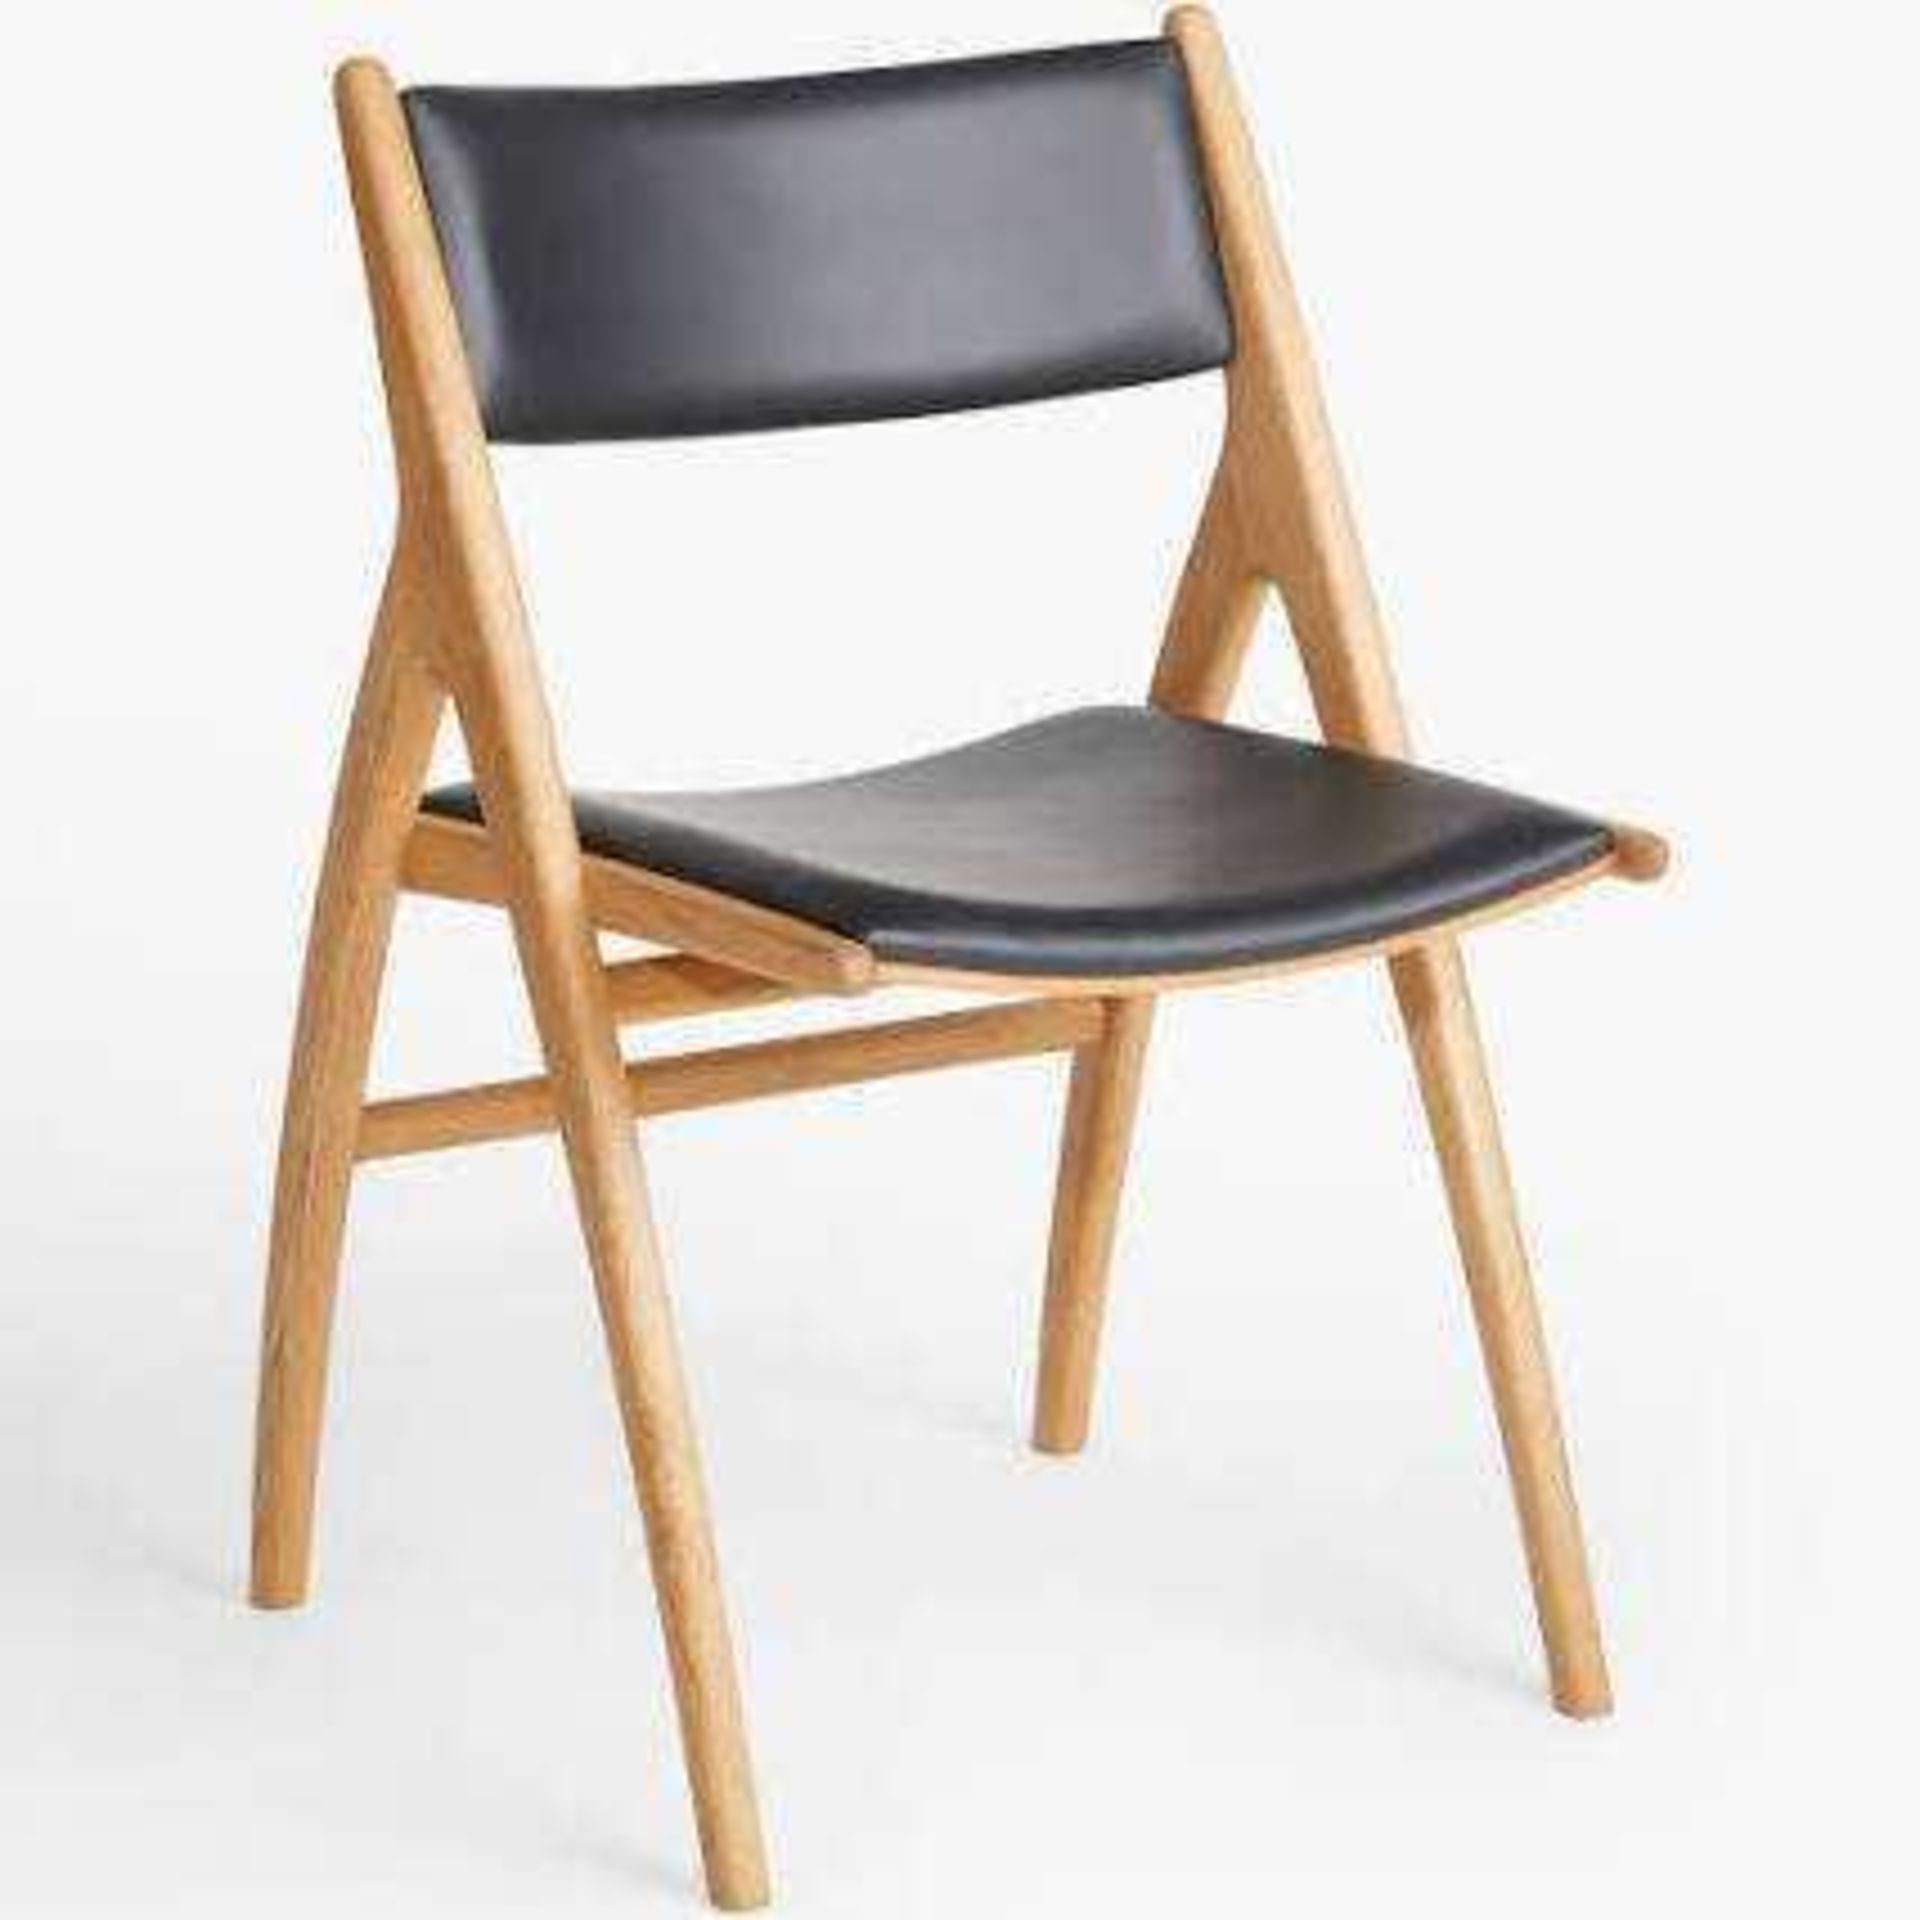 Rrp £100 Boxed John Lewis X Ray Leather Dining Chair